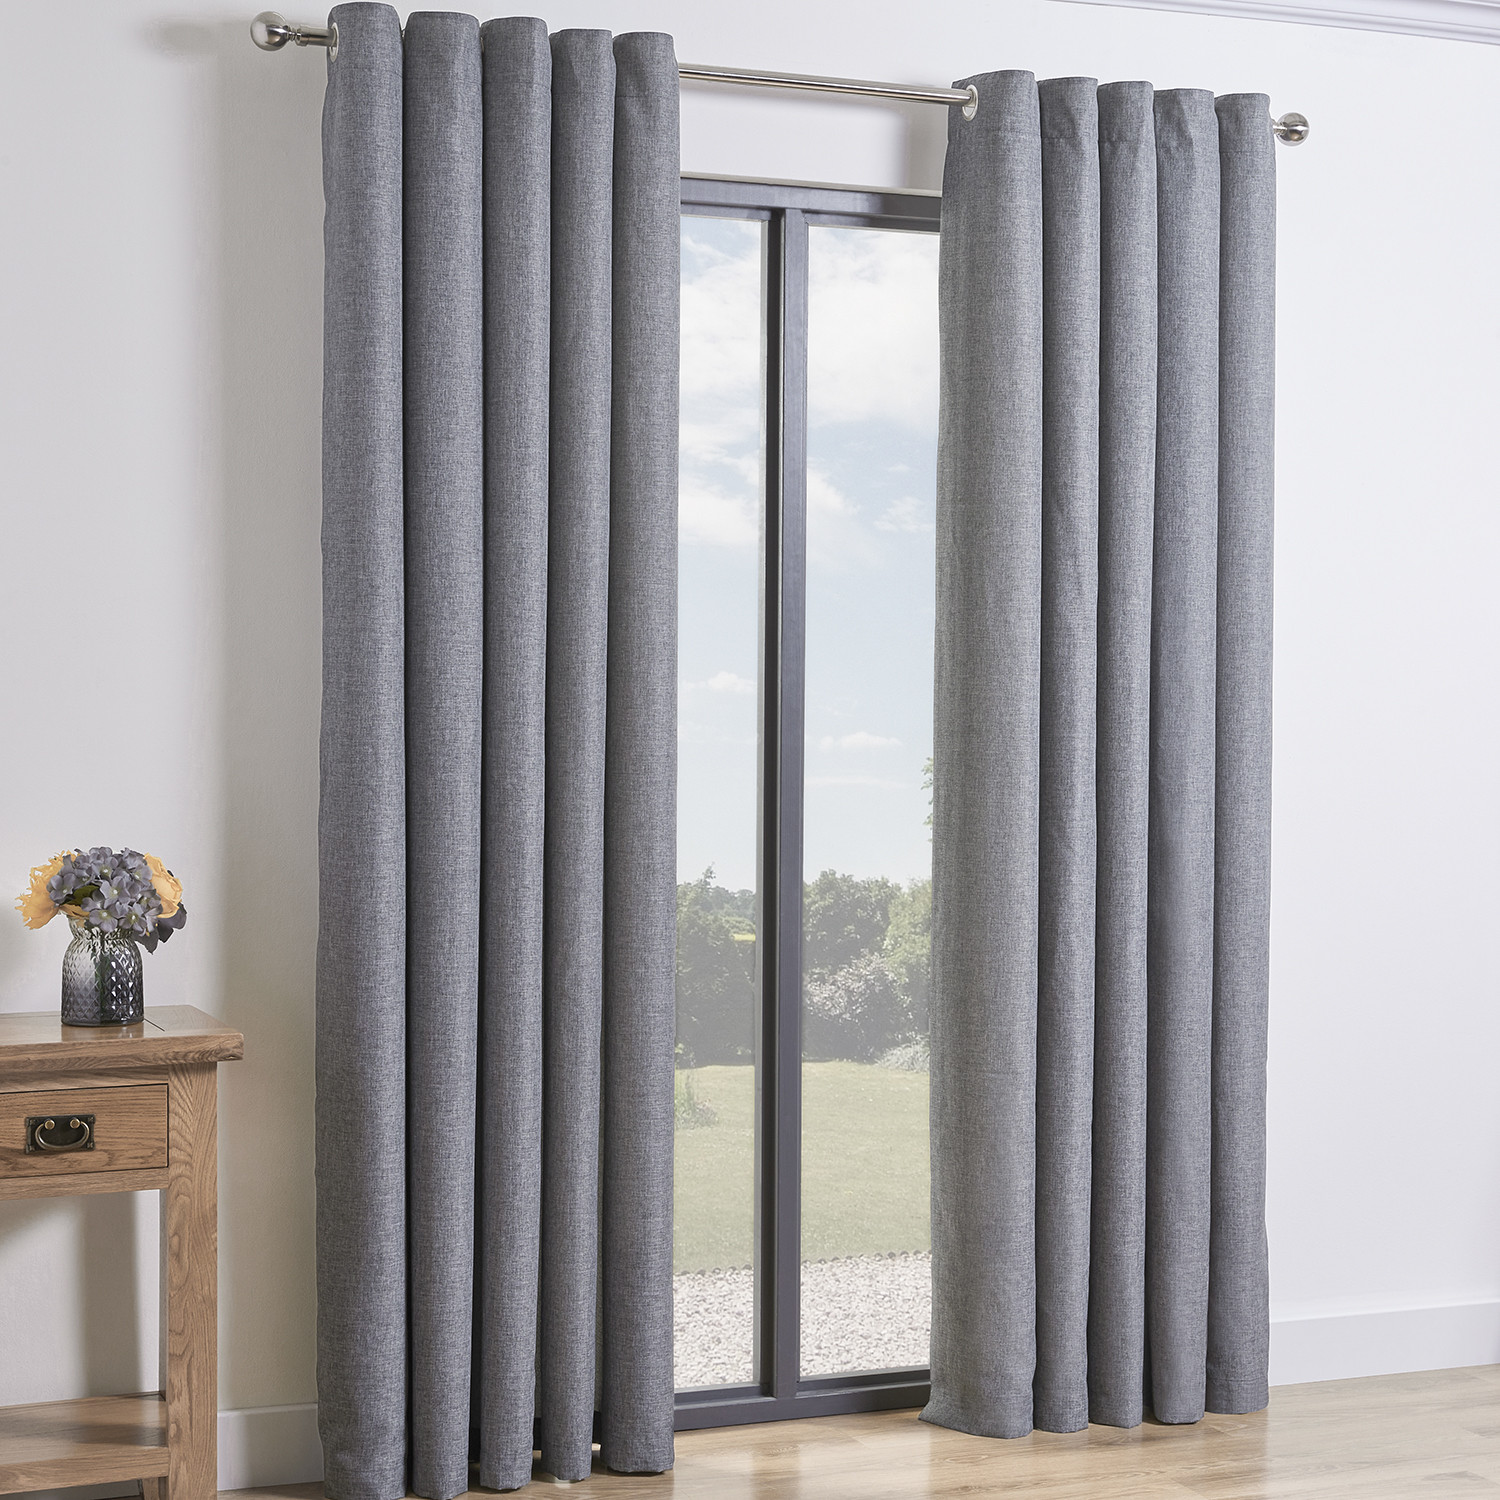 Silver Taylor Eyelet Curtains 168 x 137cm Image 1